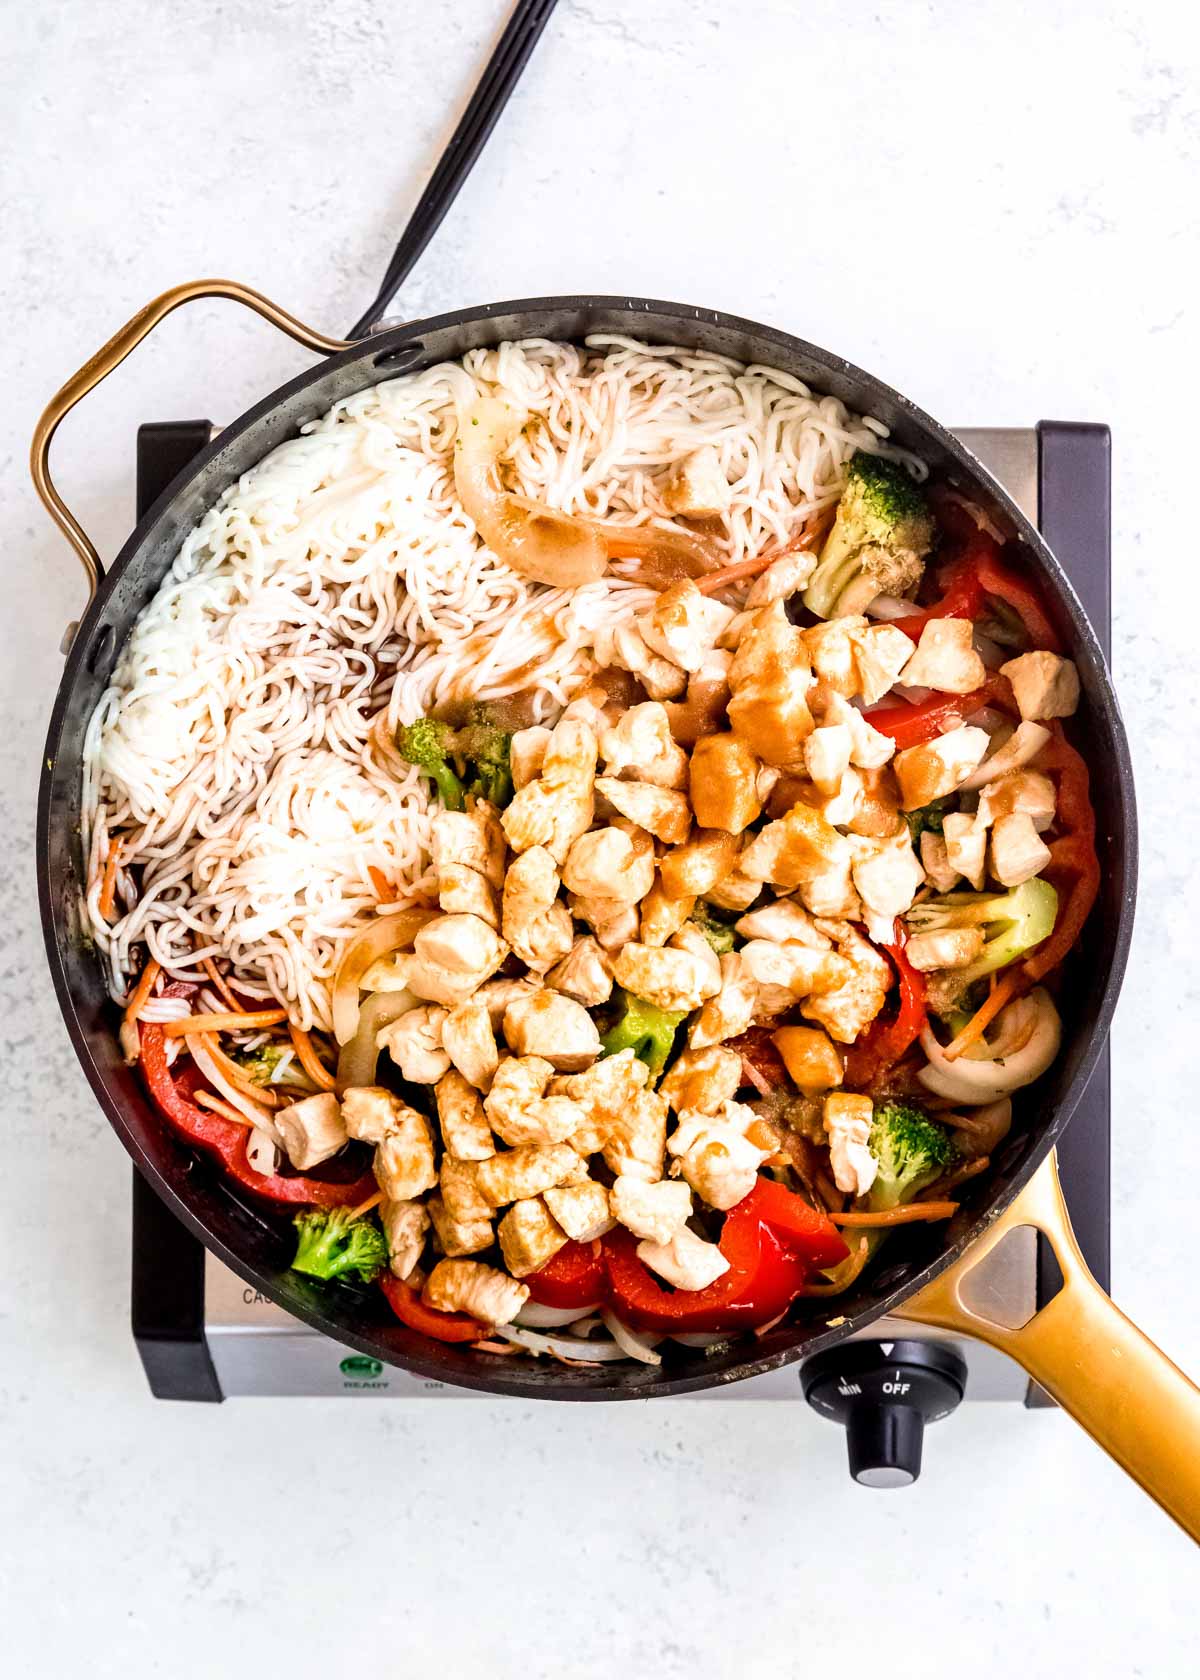 chicken, red peppers, onions, broccoli, carrots, and noodles in a large skillet